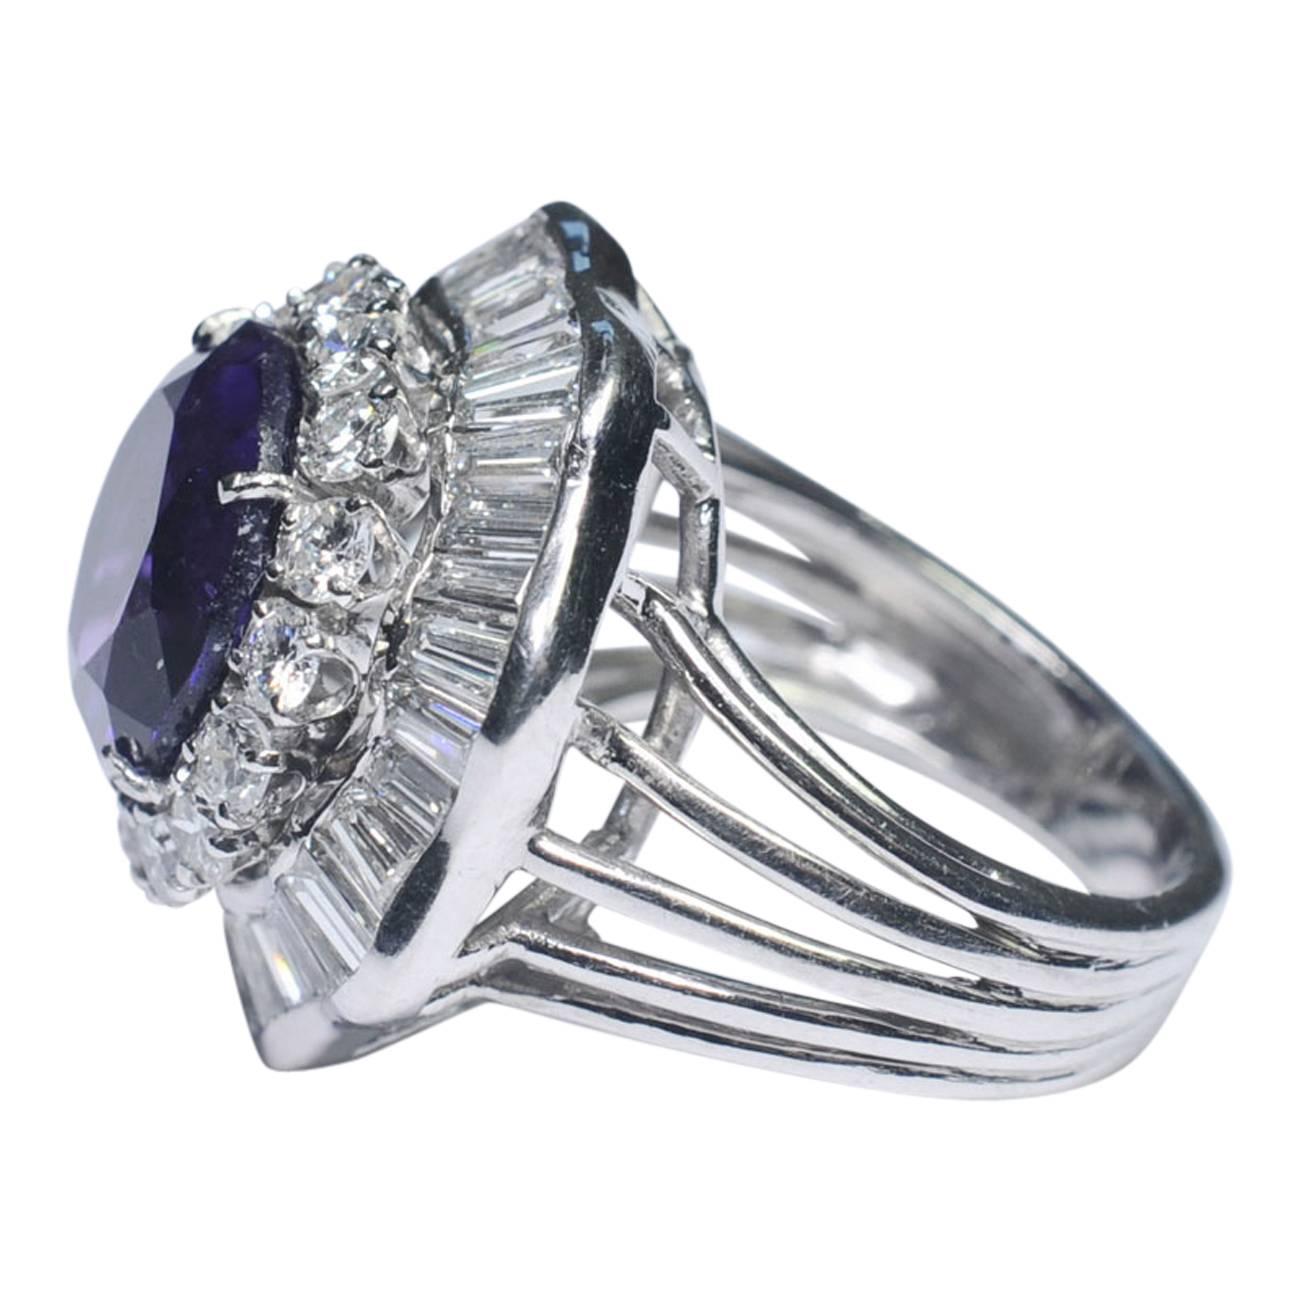 Big, bold and dramatic amethyst and diamond cocktail ring set with a deep purple amethyst weighing 5.22ct.   The stone is surrounded by a double halo of brilliant and baguette cut diamonds in a wavy ballerina design and weighing 4.50ct.  The mount